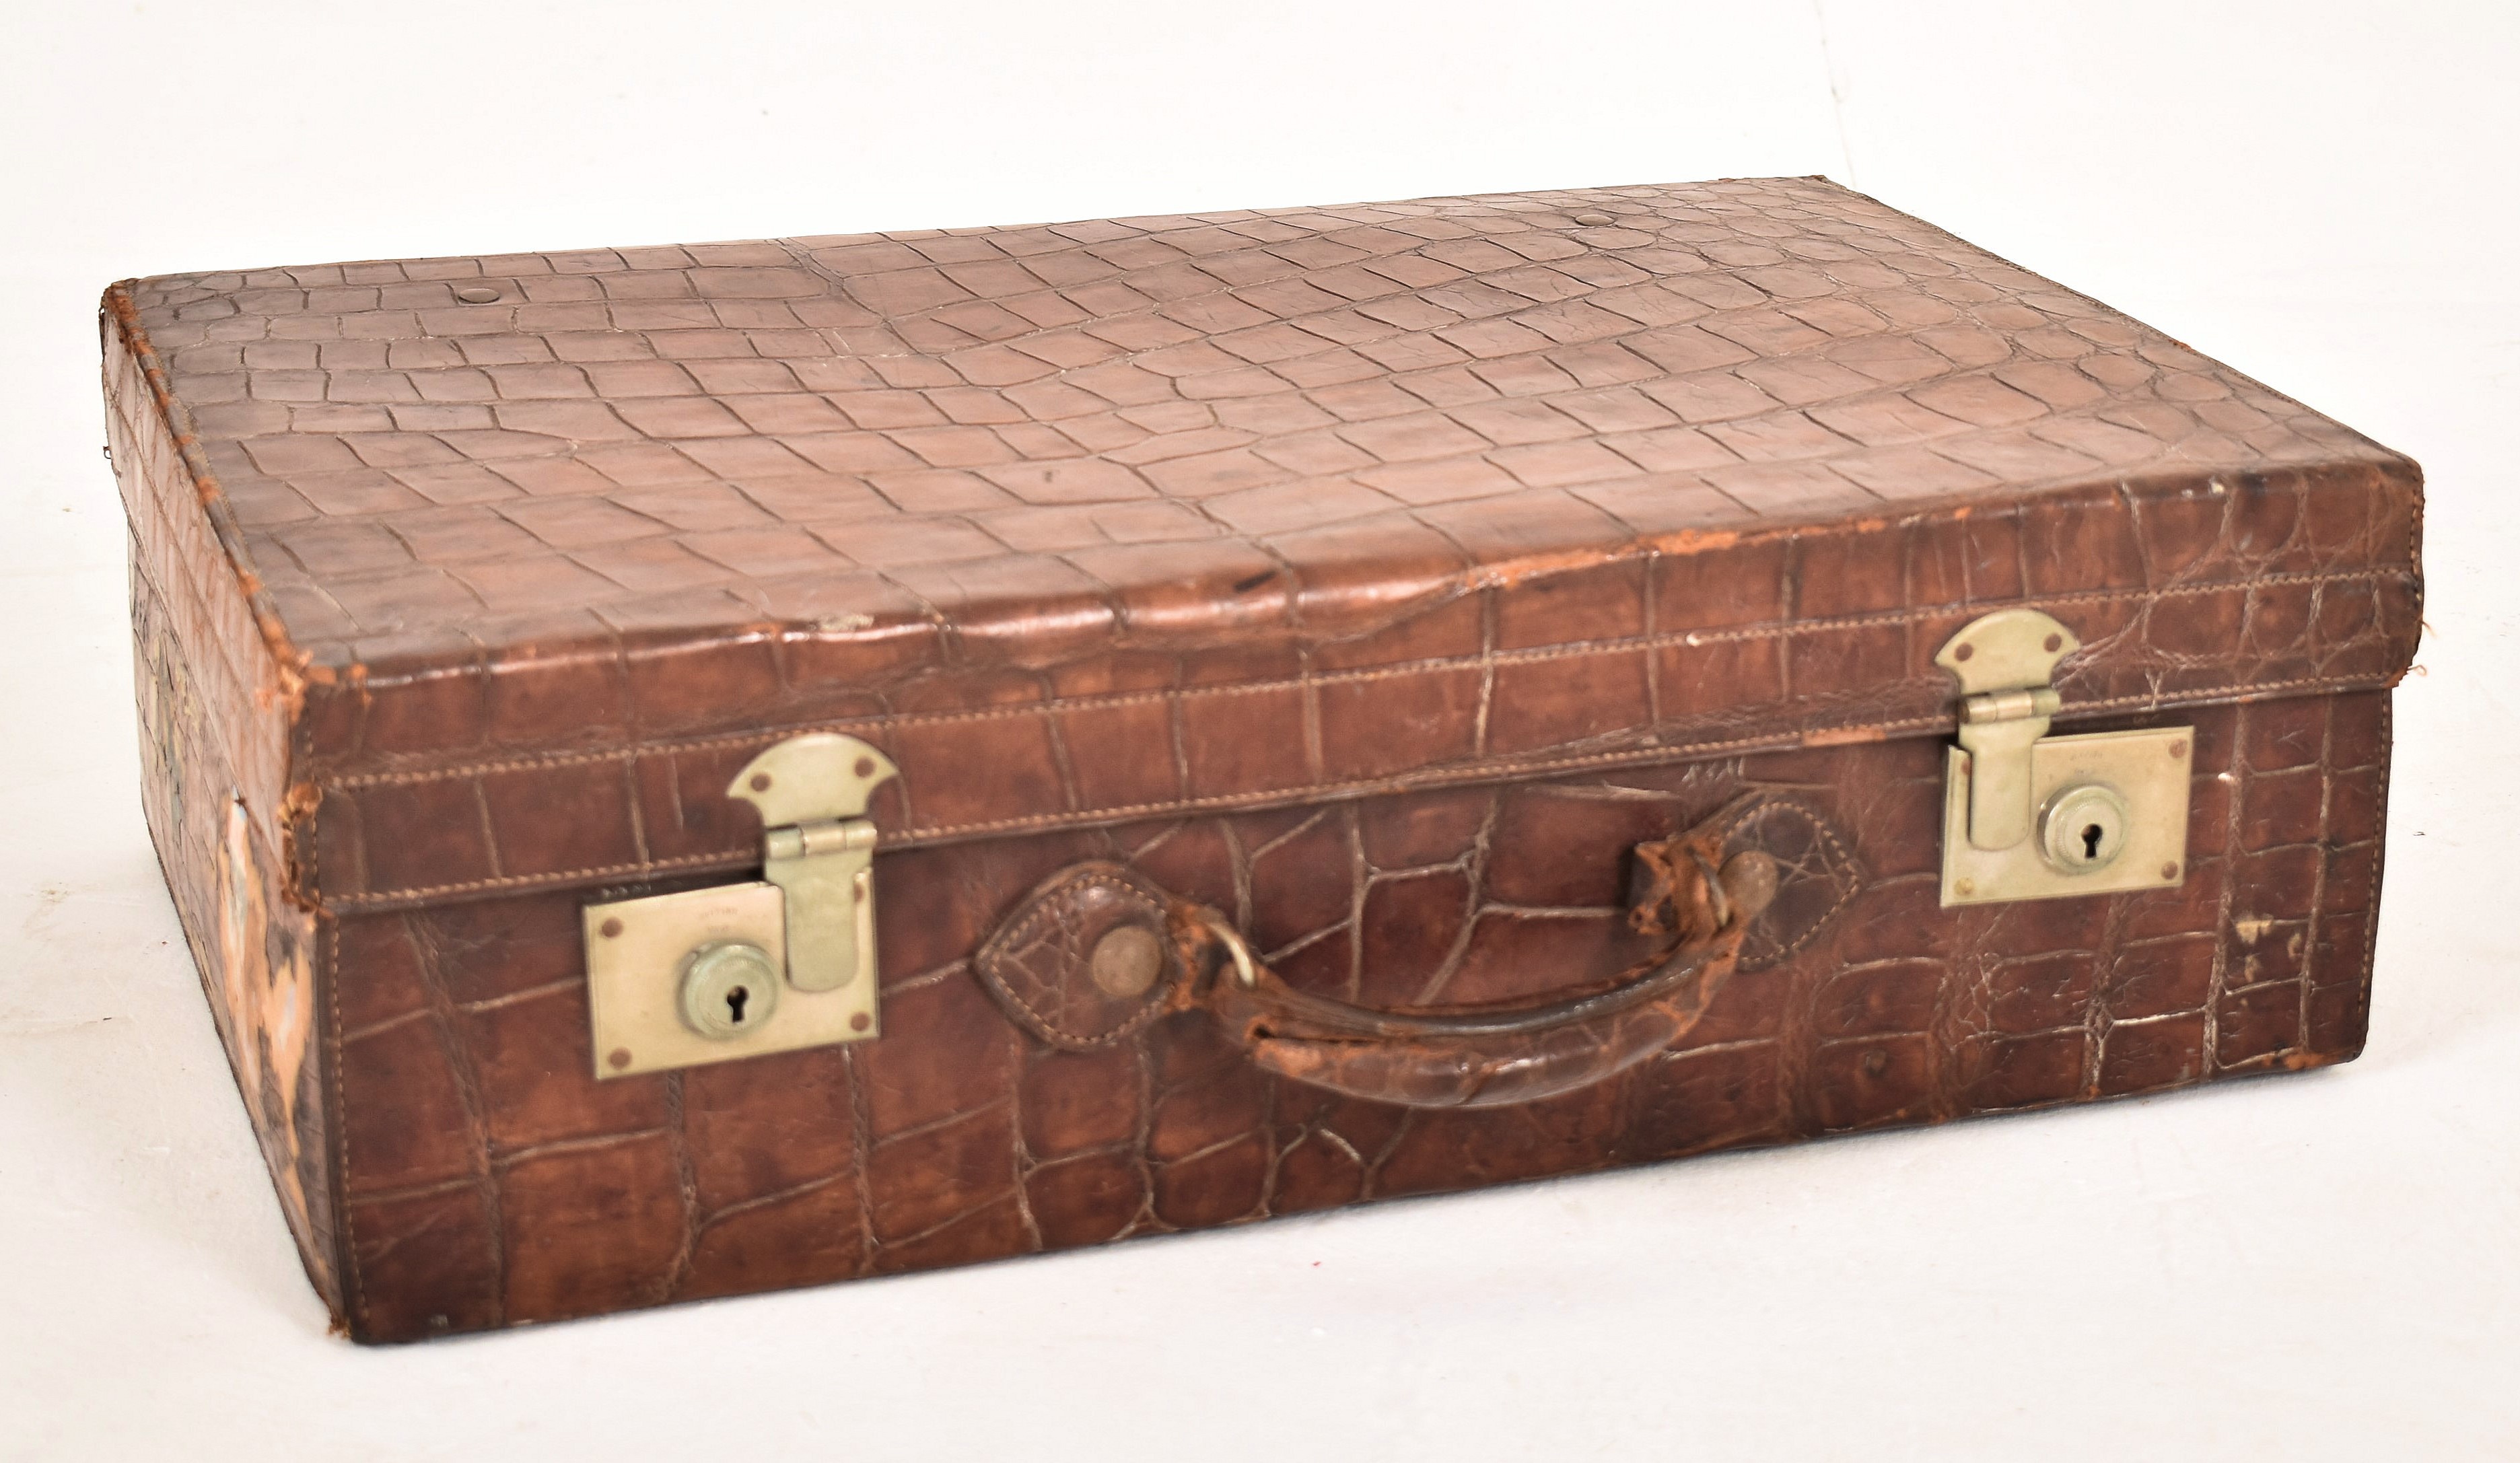 EARLY 20TH CENTURY CROCODILE SKIN LEATHER SUITCASE